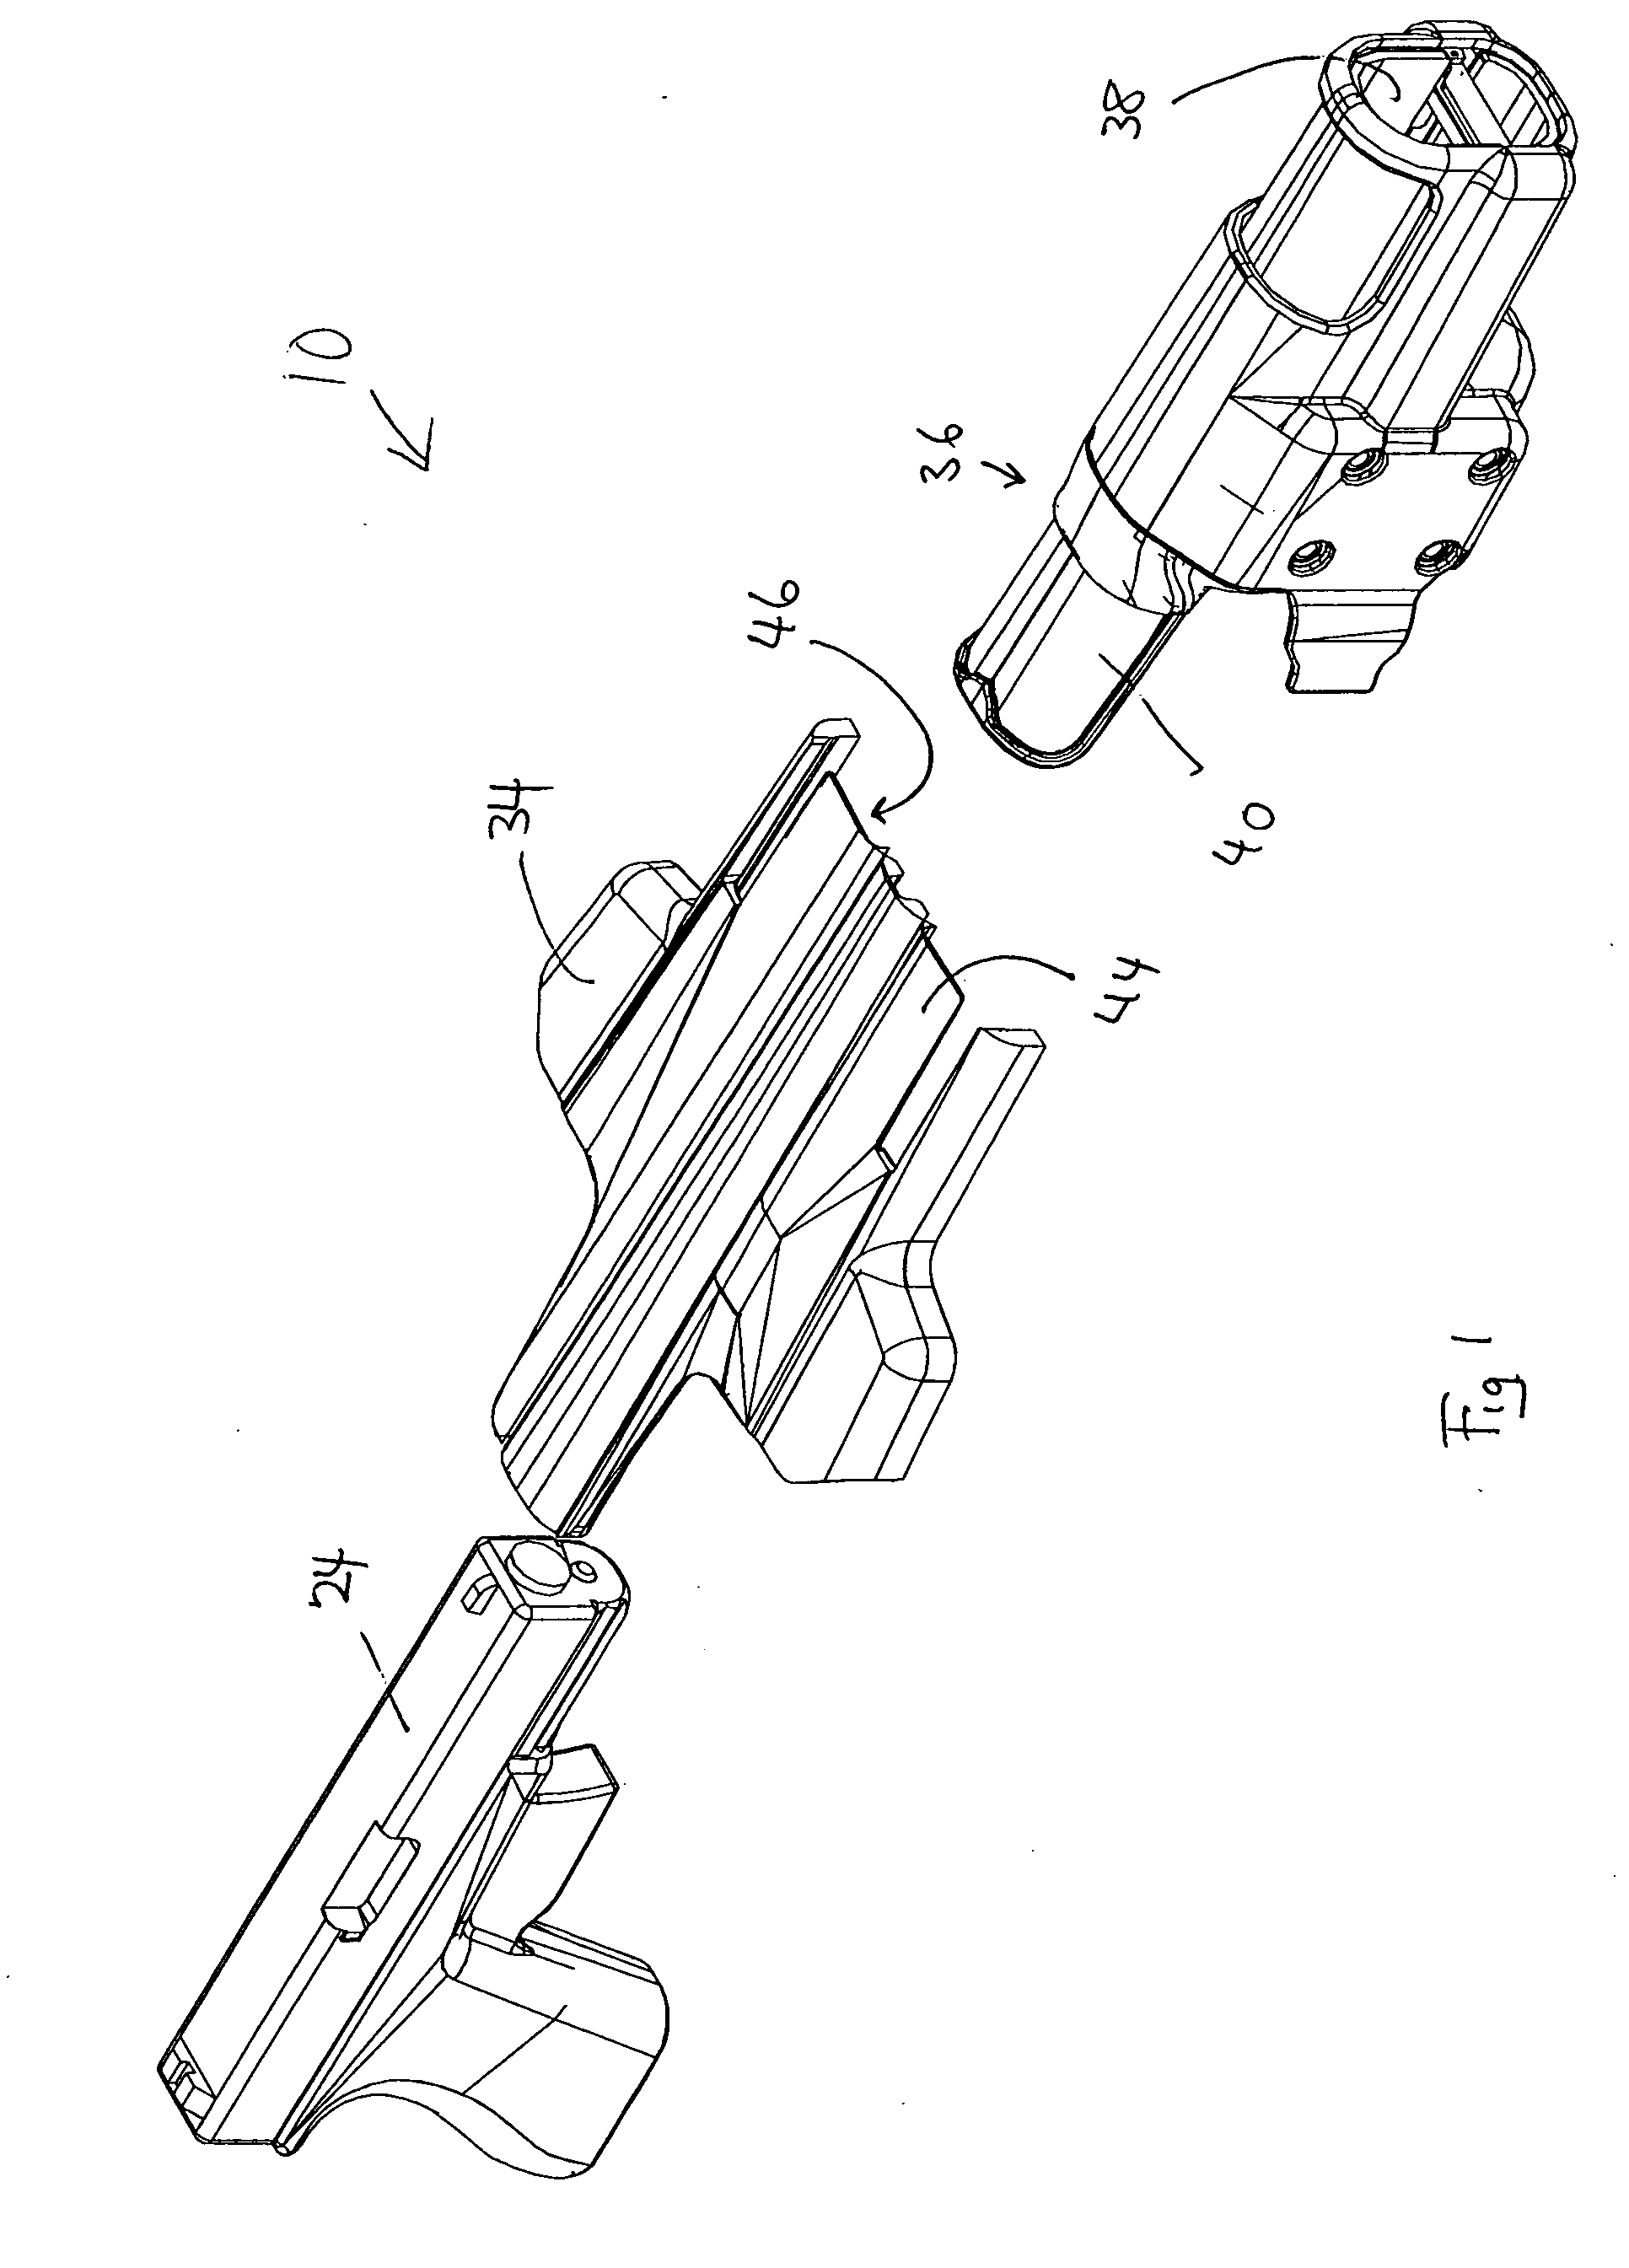 Holster manufacturing system and method of making